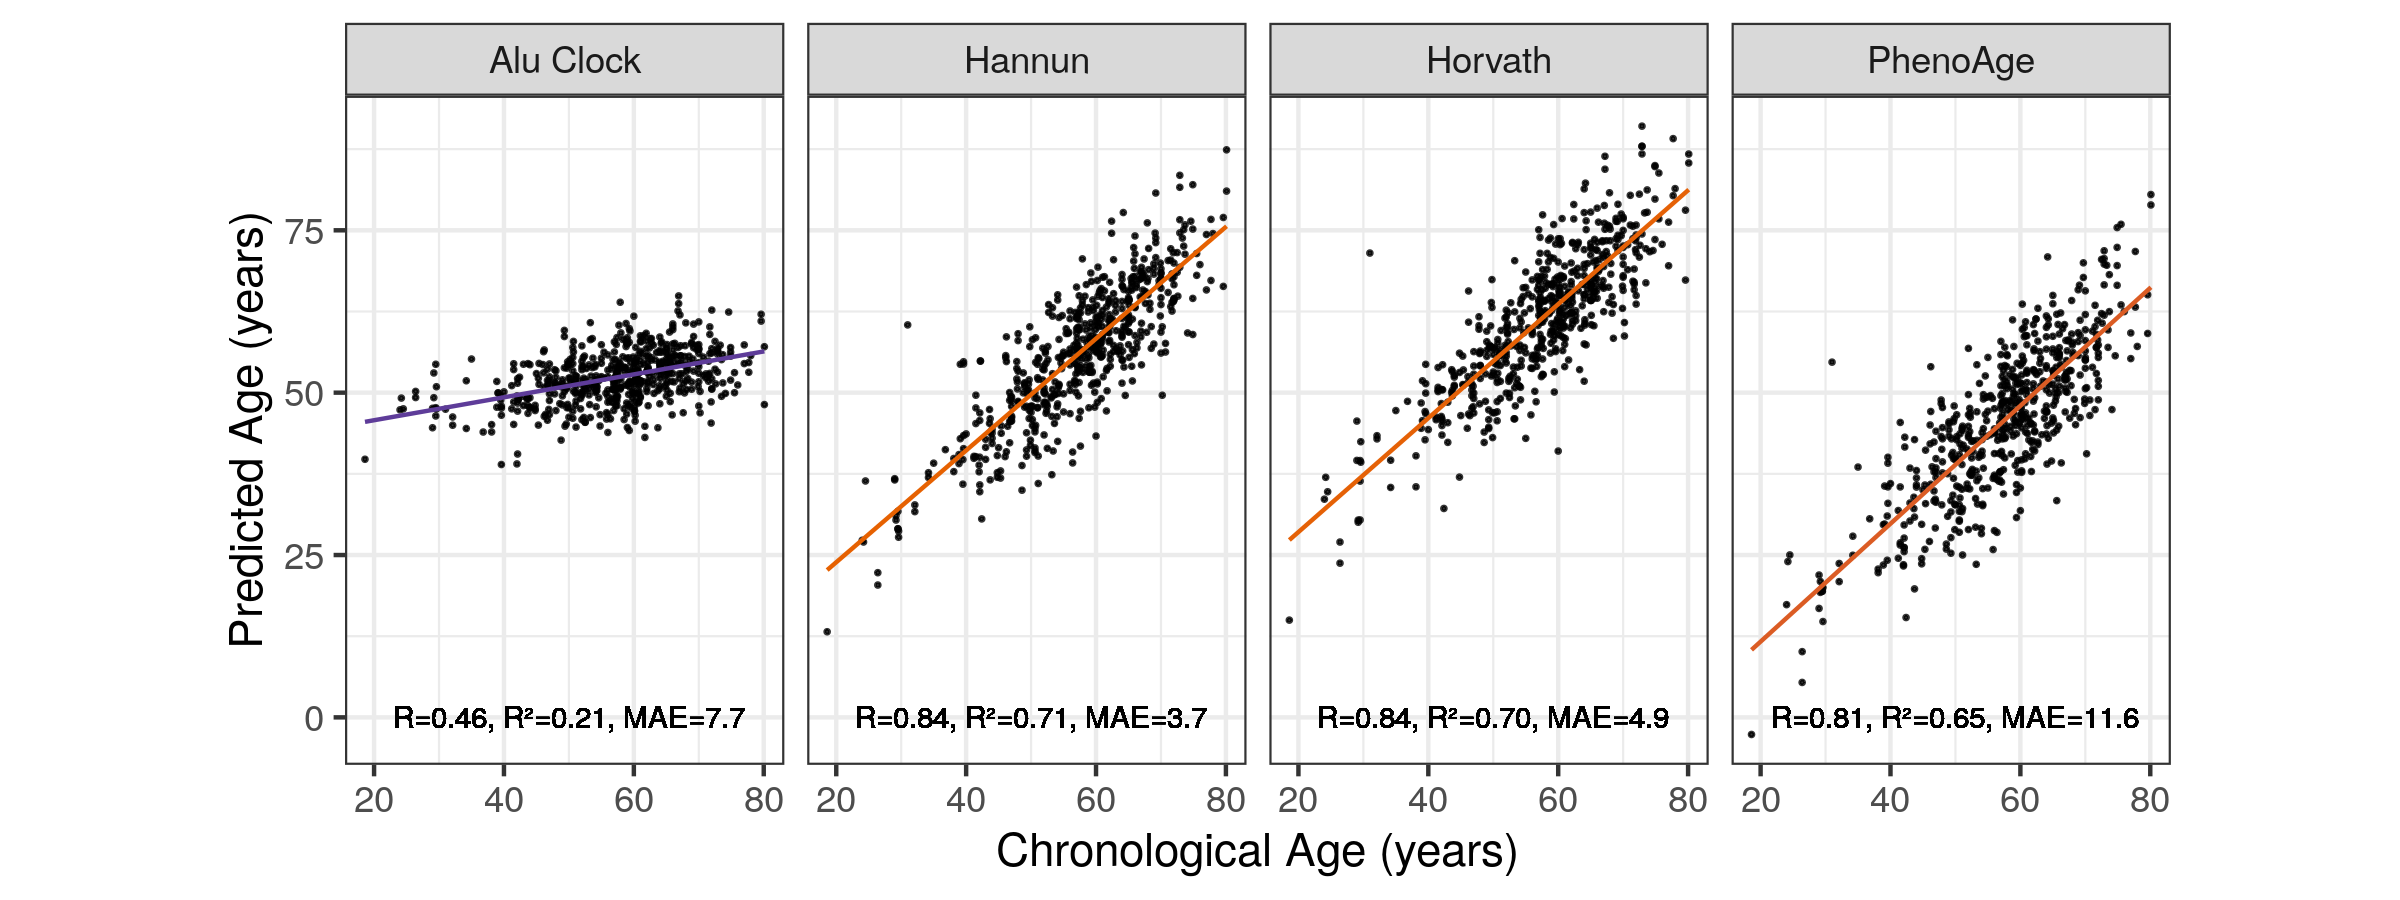 Correlation of Alu Age Acceleration with Chronological Age Across Models MAE = median absolute error. Orange = High \(R^2\), purple = low \(R^2\). Alu Clock here refers to the unfiltered model trained on the Training 1 set.